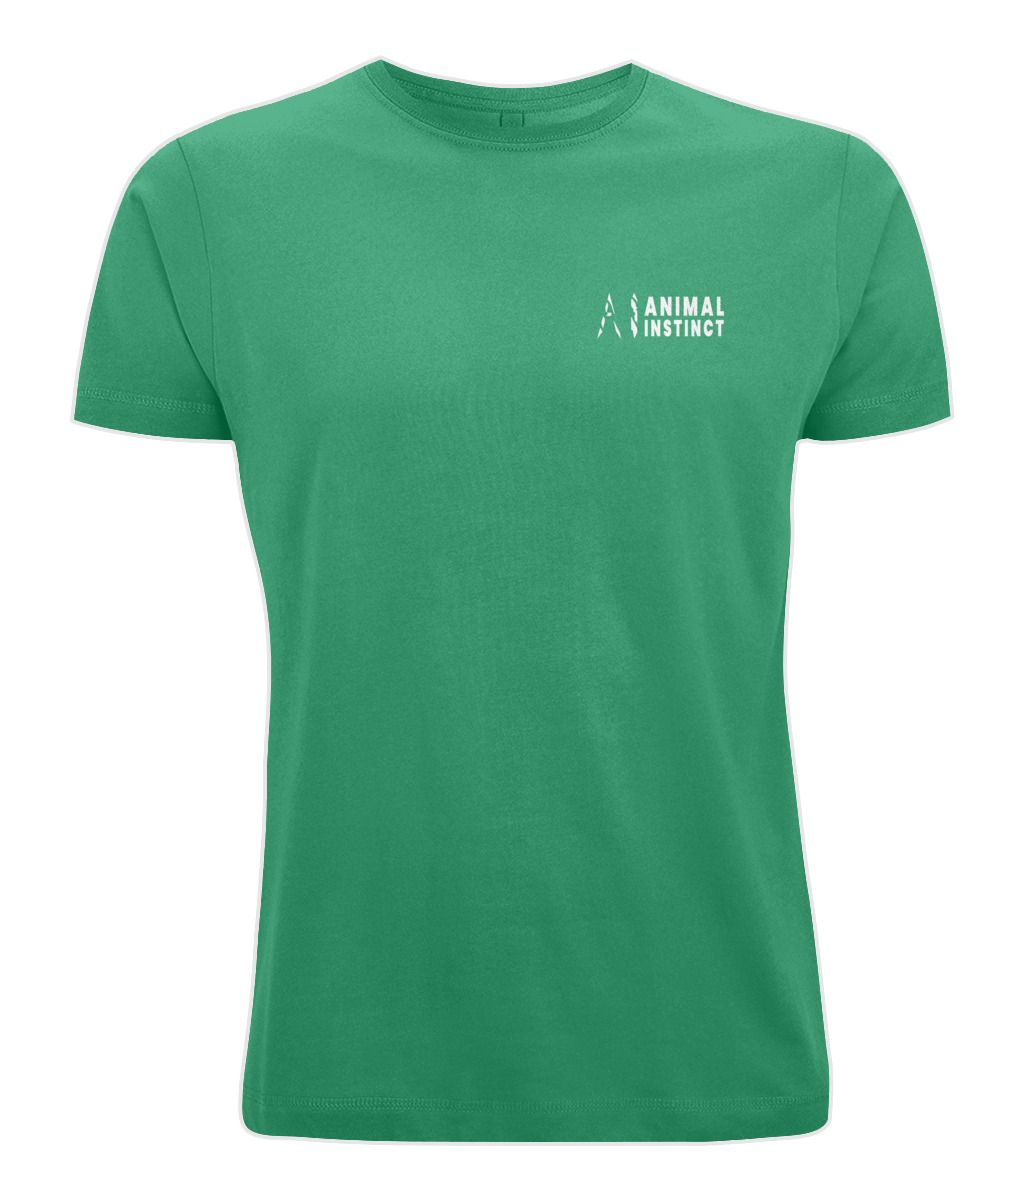 Mens mint green Casual Cotton T-Shirt with White AI logo and Animal Instinct in White writing on the left chest